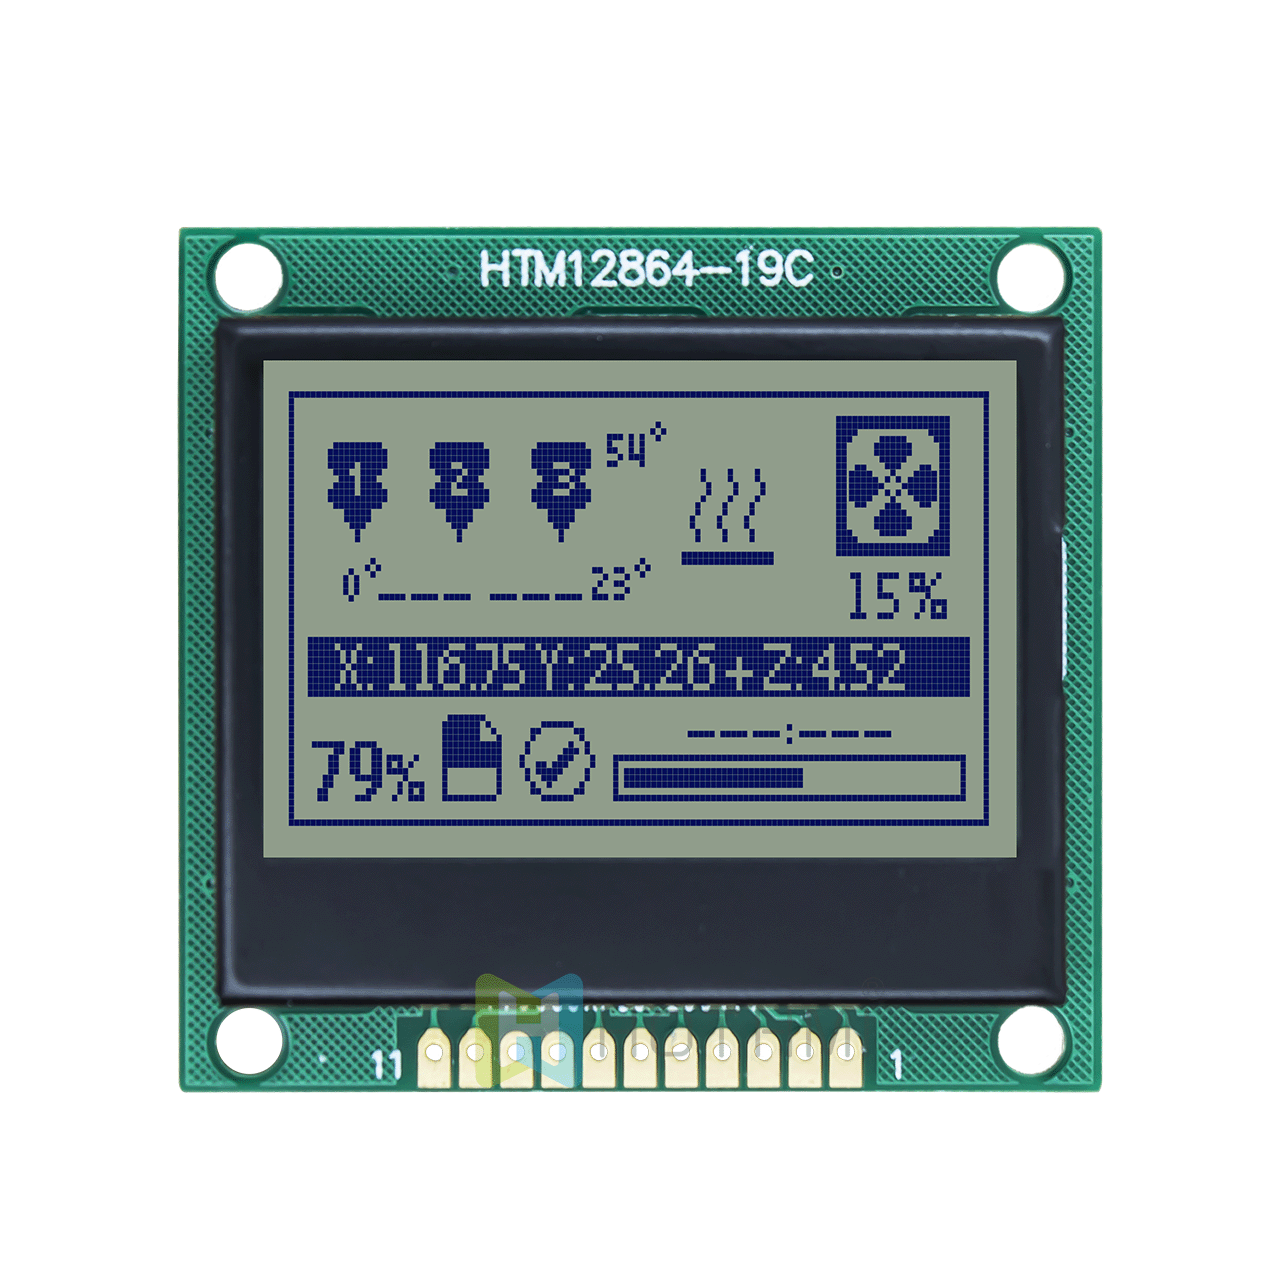 1.7 inch 128 x 64 LCD graphic display | 12864 LCD graphic display module | SPI interface | STN positive gray background blue character display | translucent polarizer